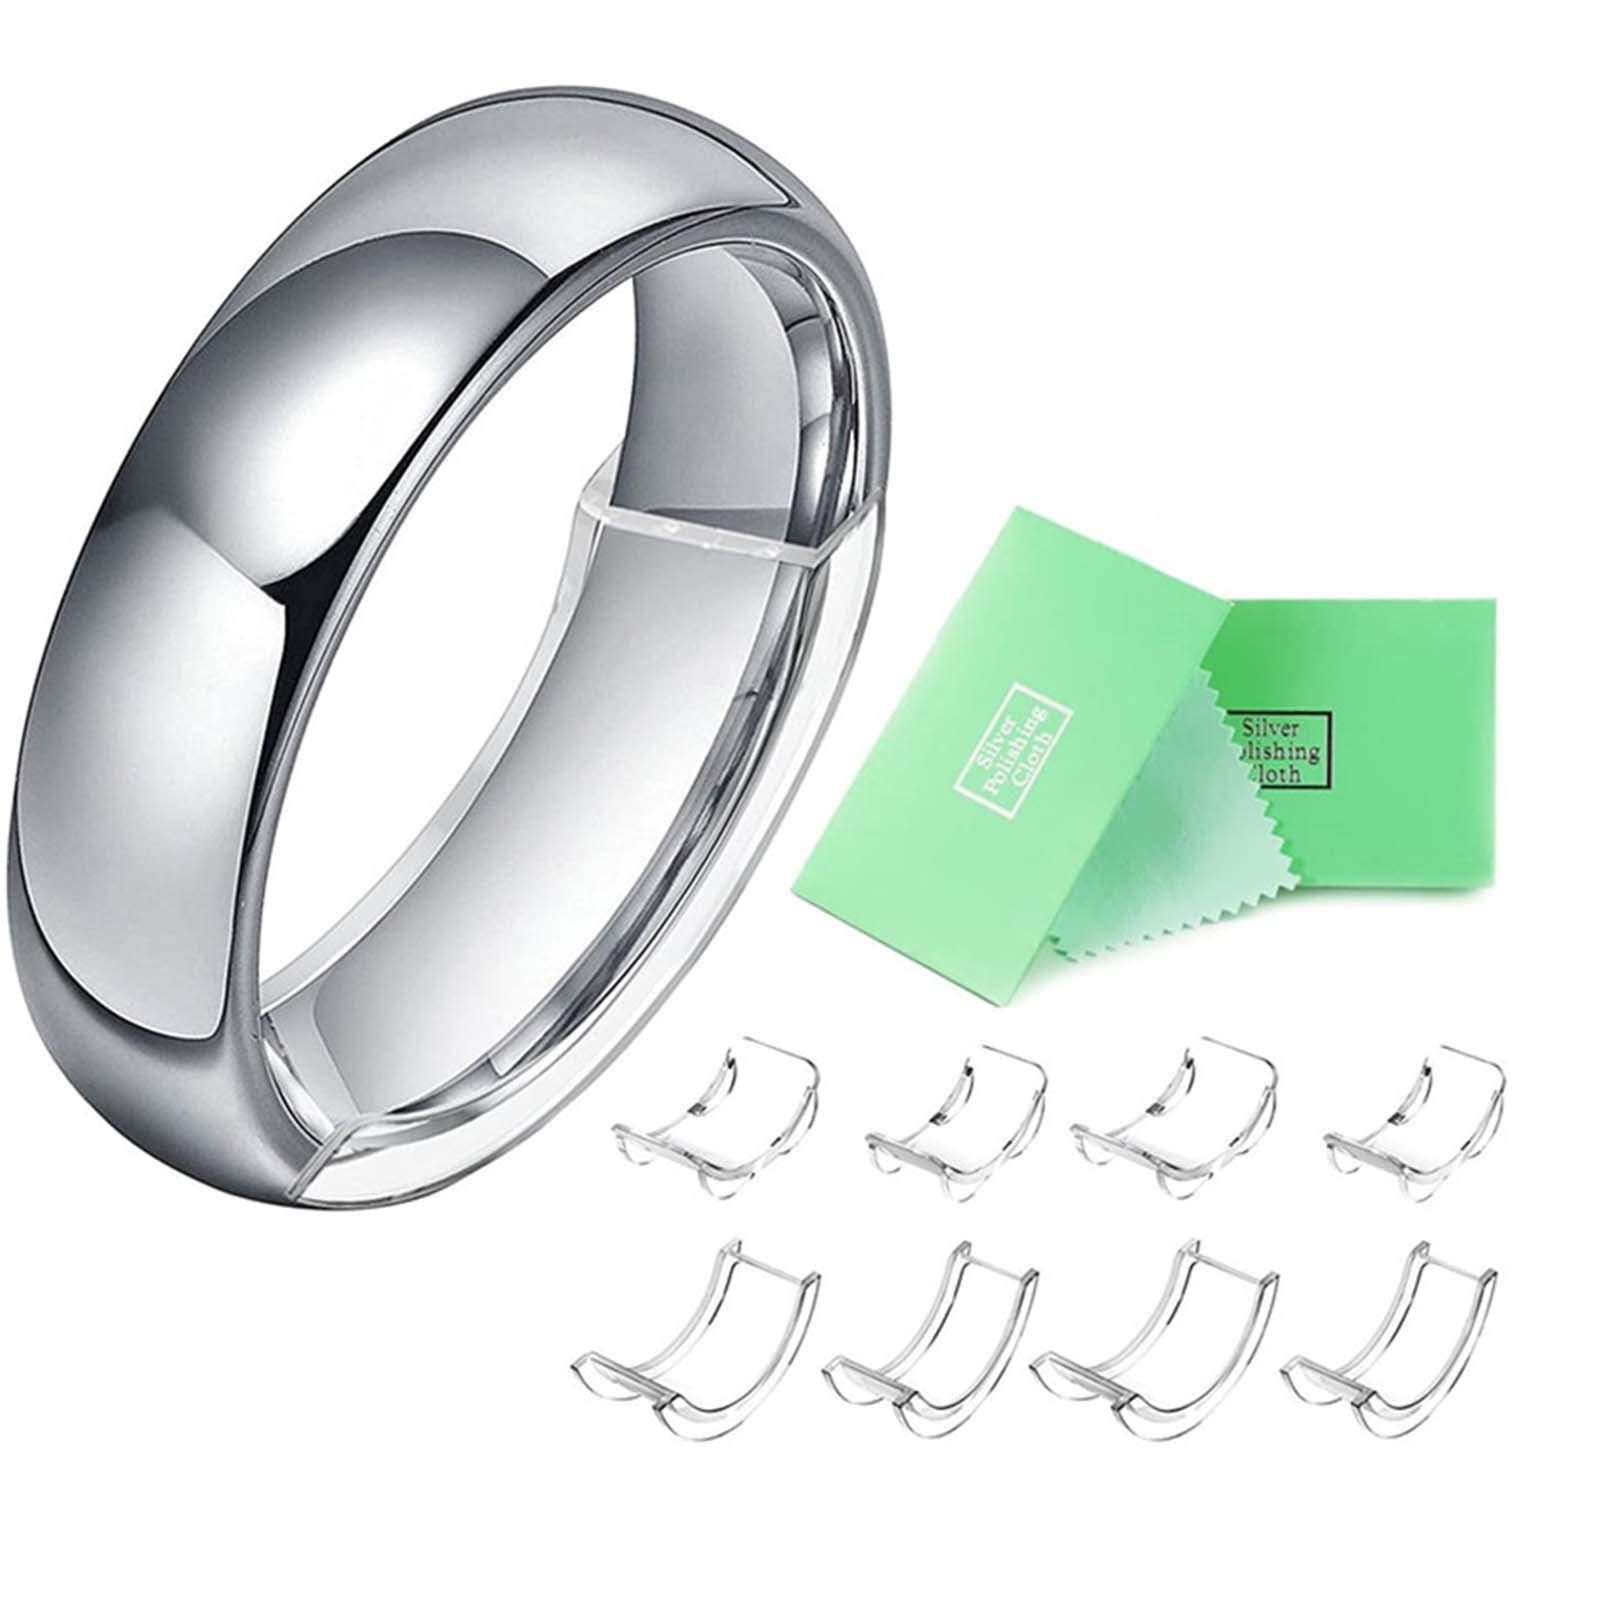 4 Kinds of 100mm Invisible Ring Spacer Invisible Ring Guards for Wedding Rings Fitter Tightener Resizers Strips EXCEART 12 Pcs Ring Size Adjuster for Loose Rings